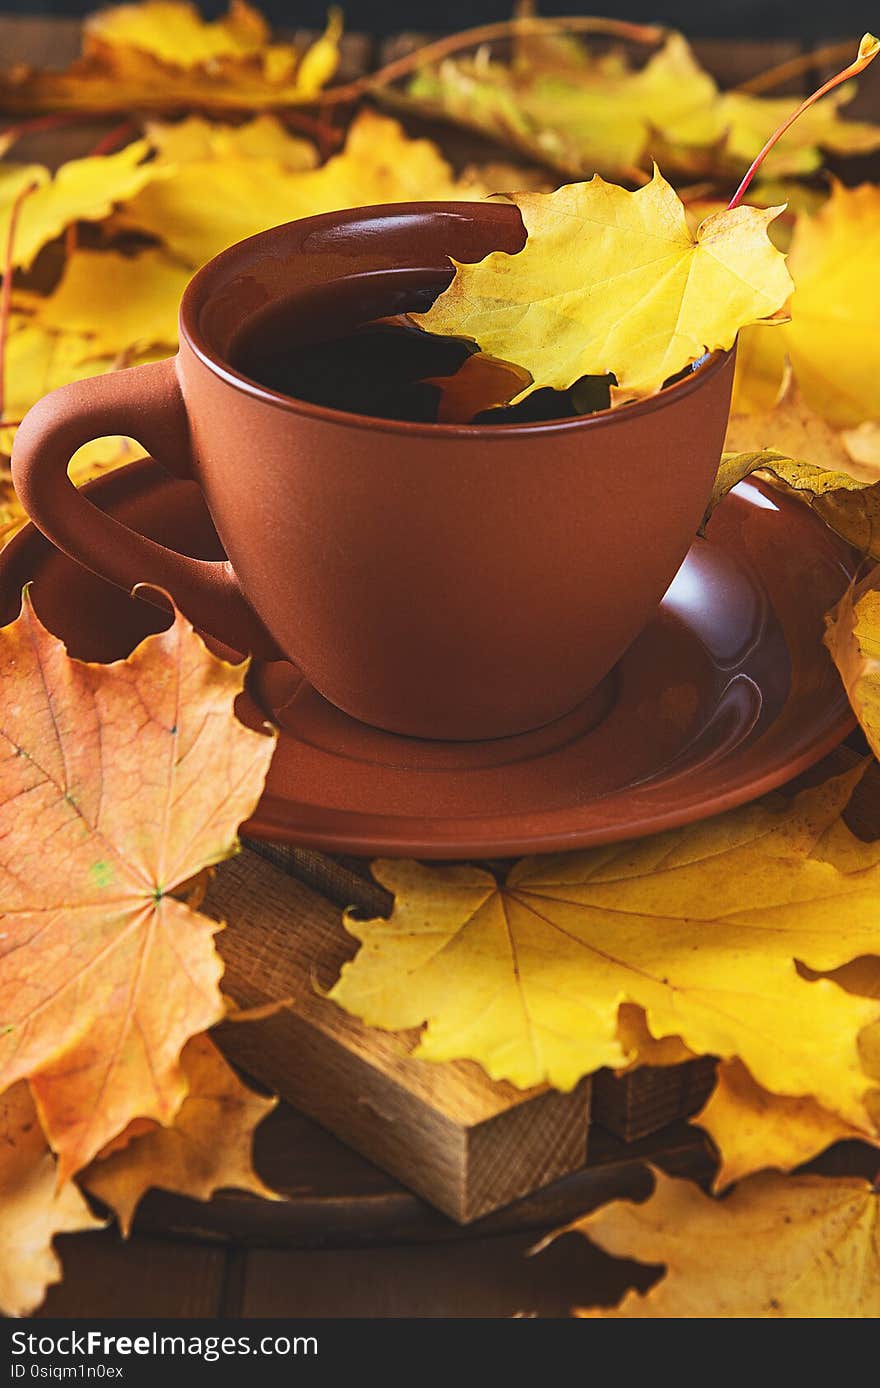 Autumn, fall leaves, hot cup of coffee on wooden table background.